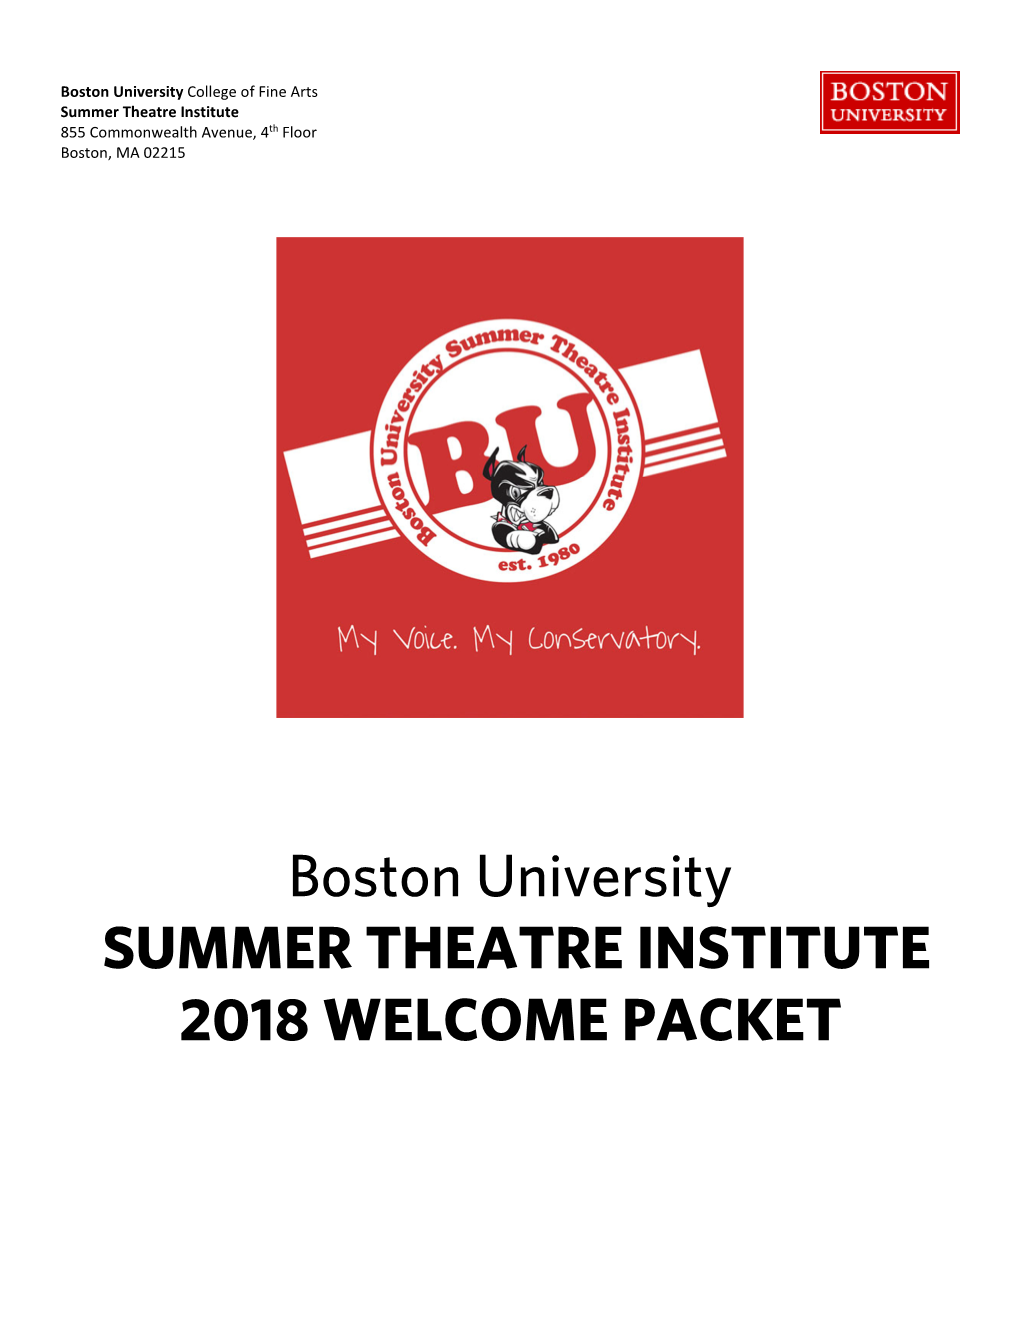 Boston University SUMMER THEATRE INSTITUTE 2018 WELCOME PACKET